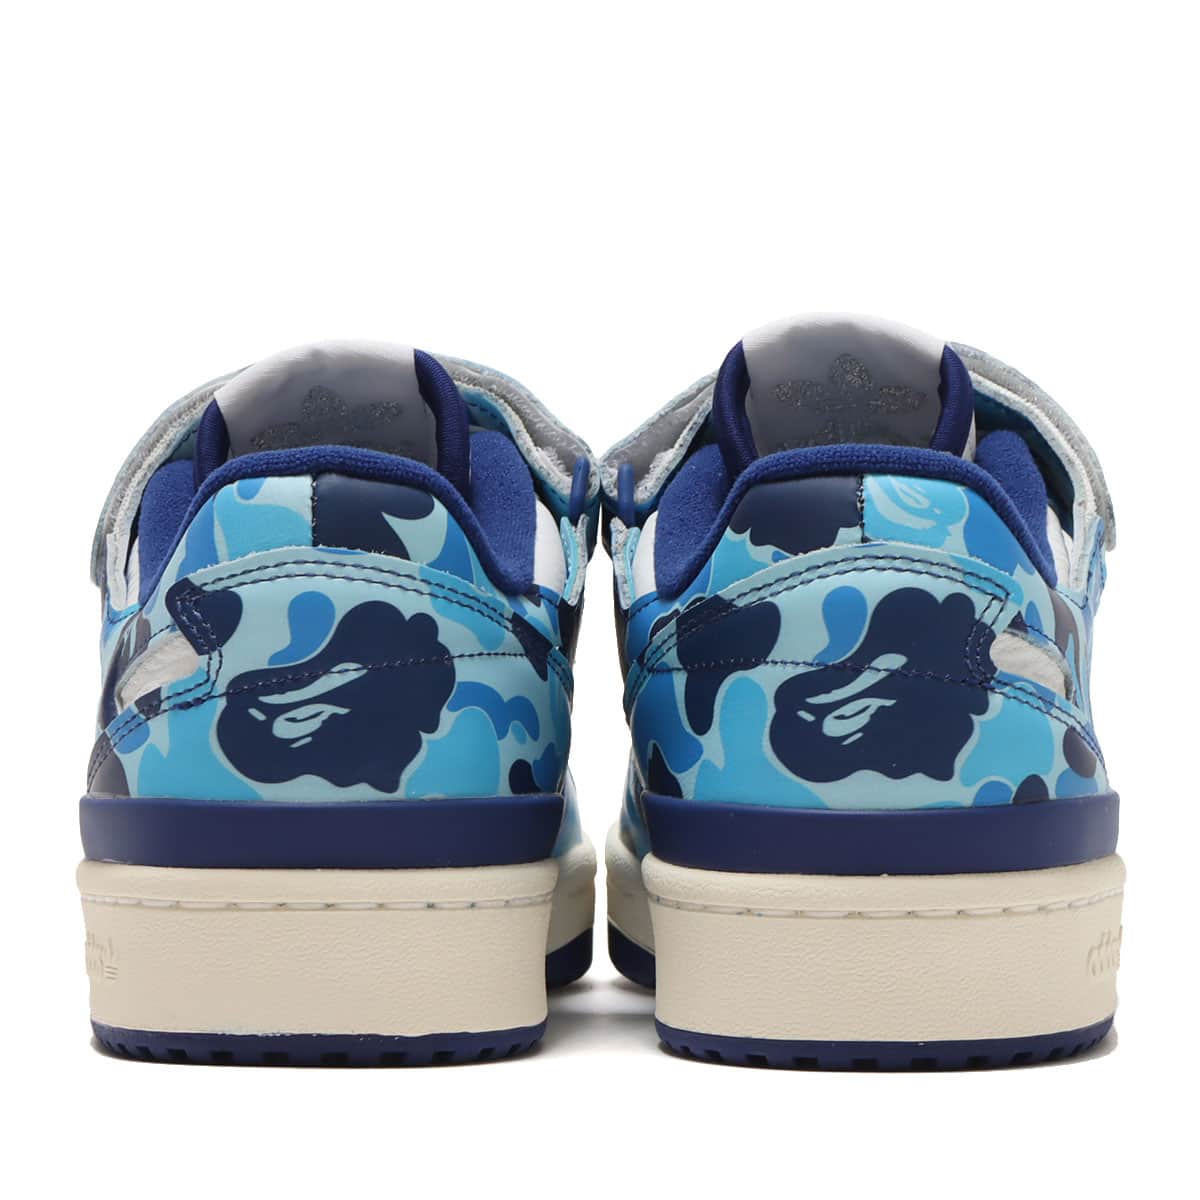 adidas FORUM 84 BAPE LOW FTWWHT/SUPCOL/OWHITE 23SS-S